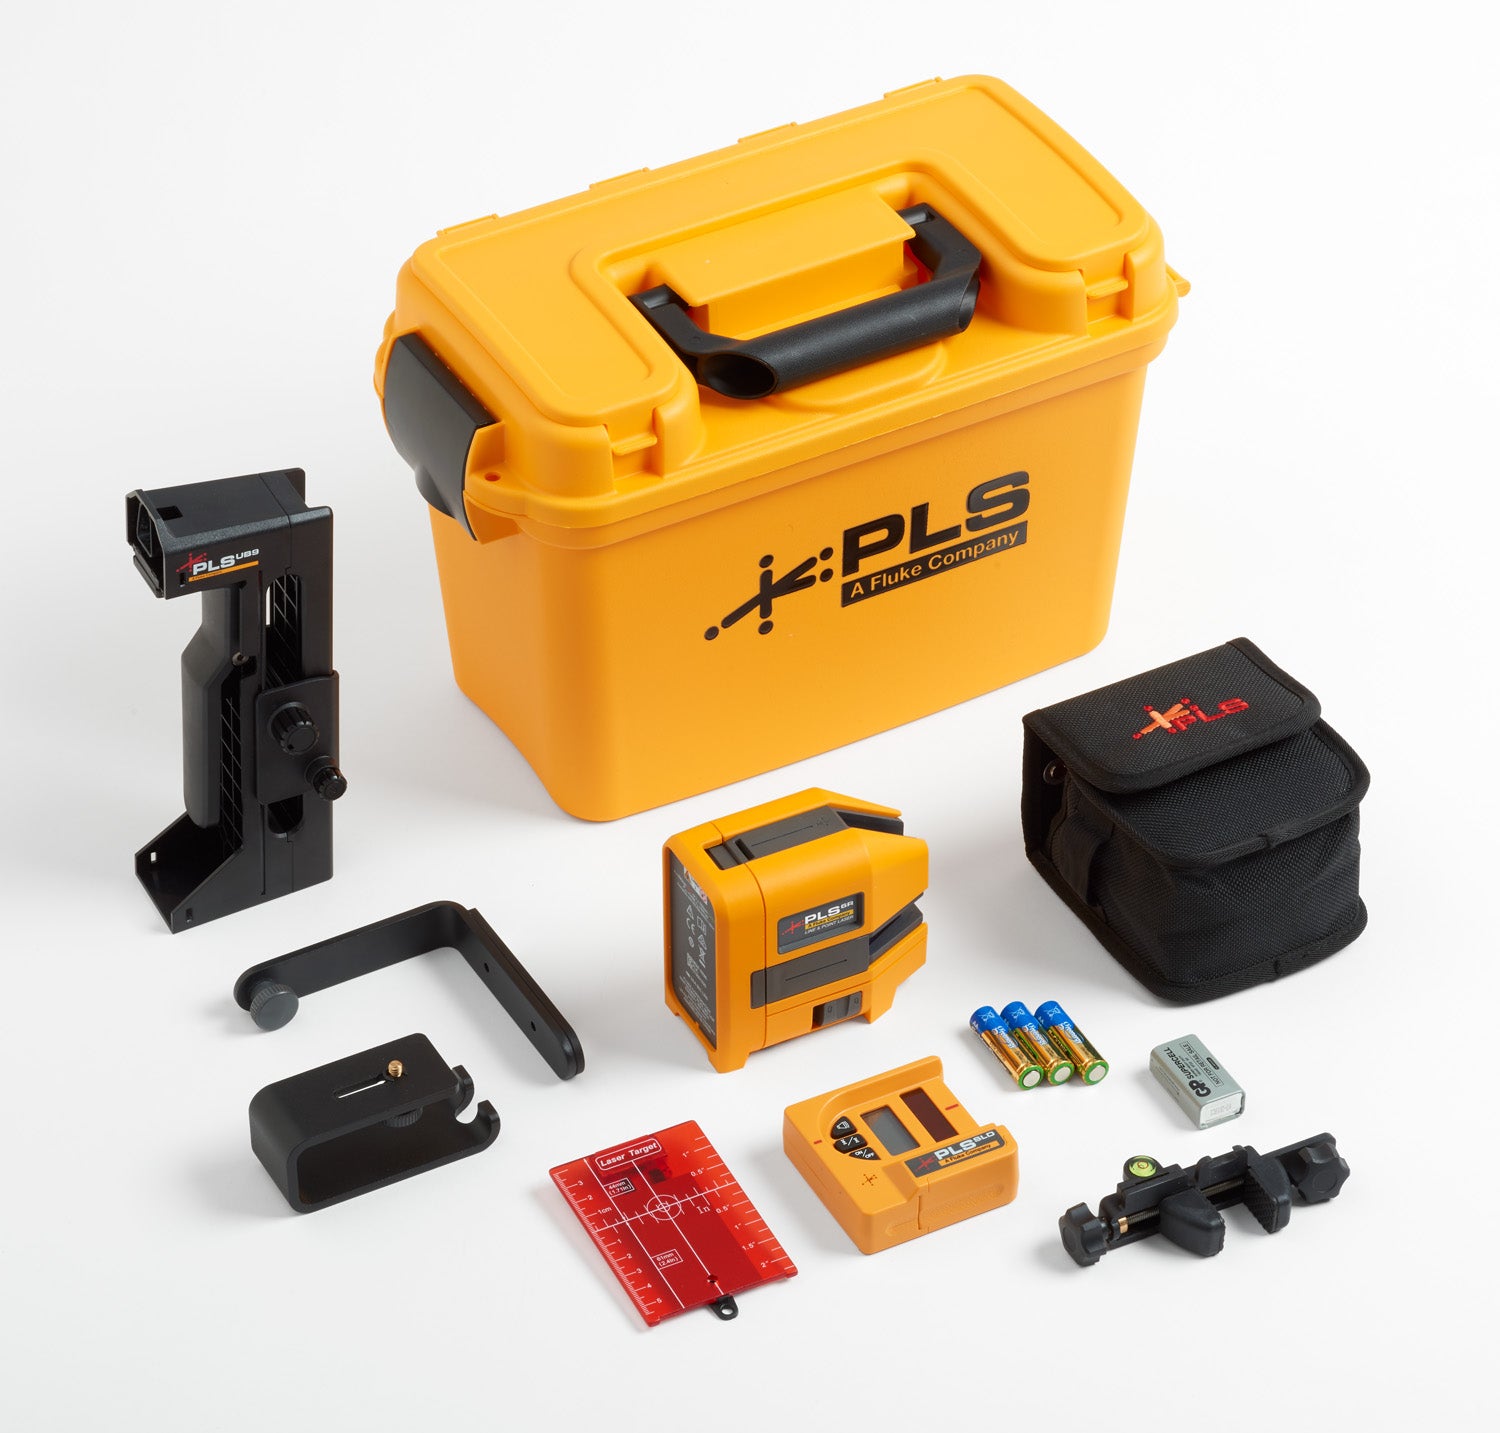 Fluke PLS 6R SYS, Cross Line and Point Red Laser System- Pacific Laser Systems